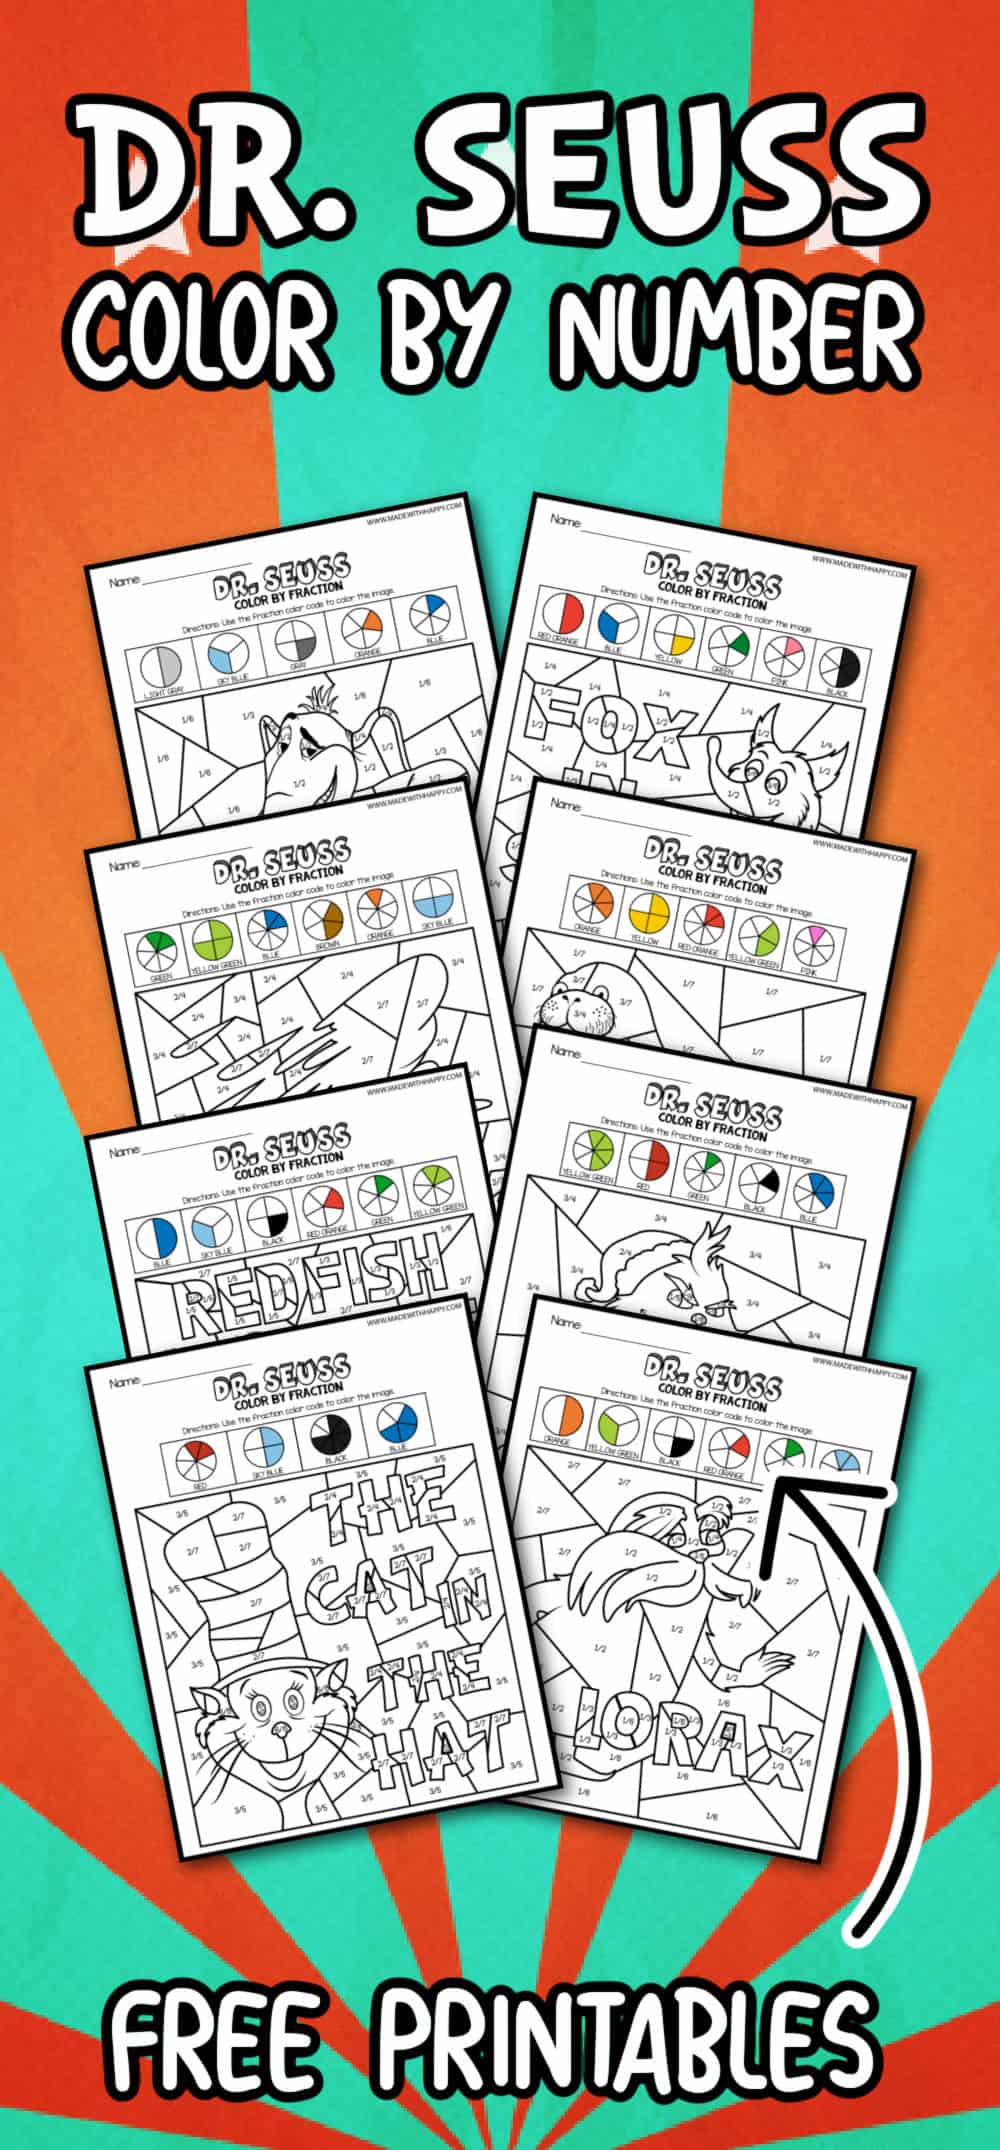 Free Printable Dr Seuss Color By number activity book